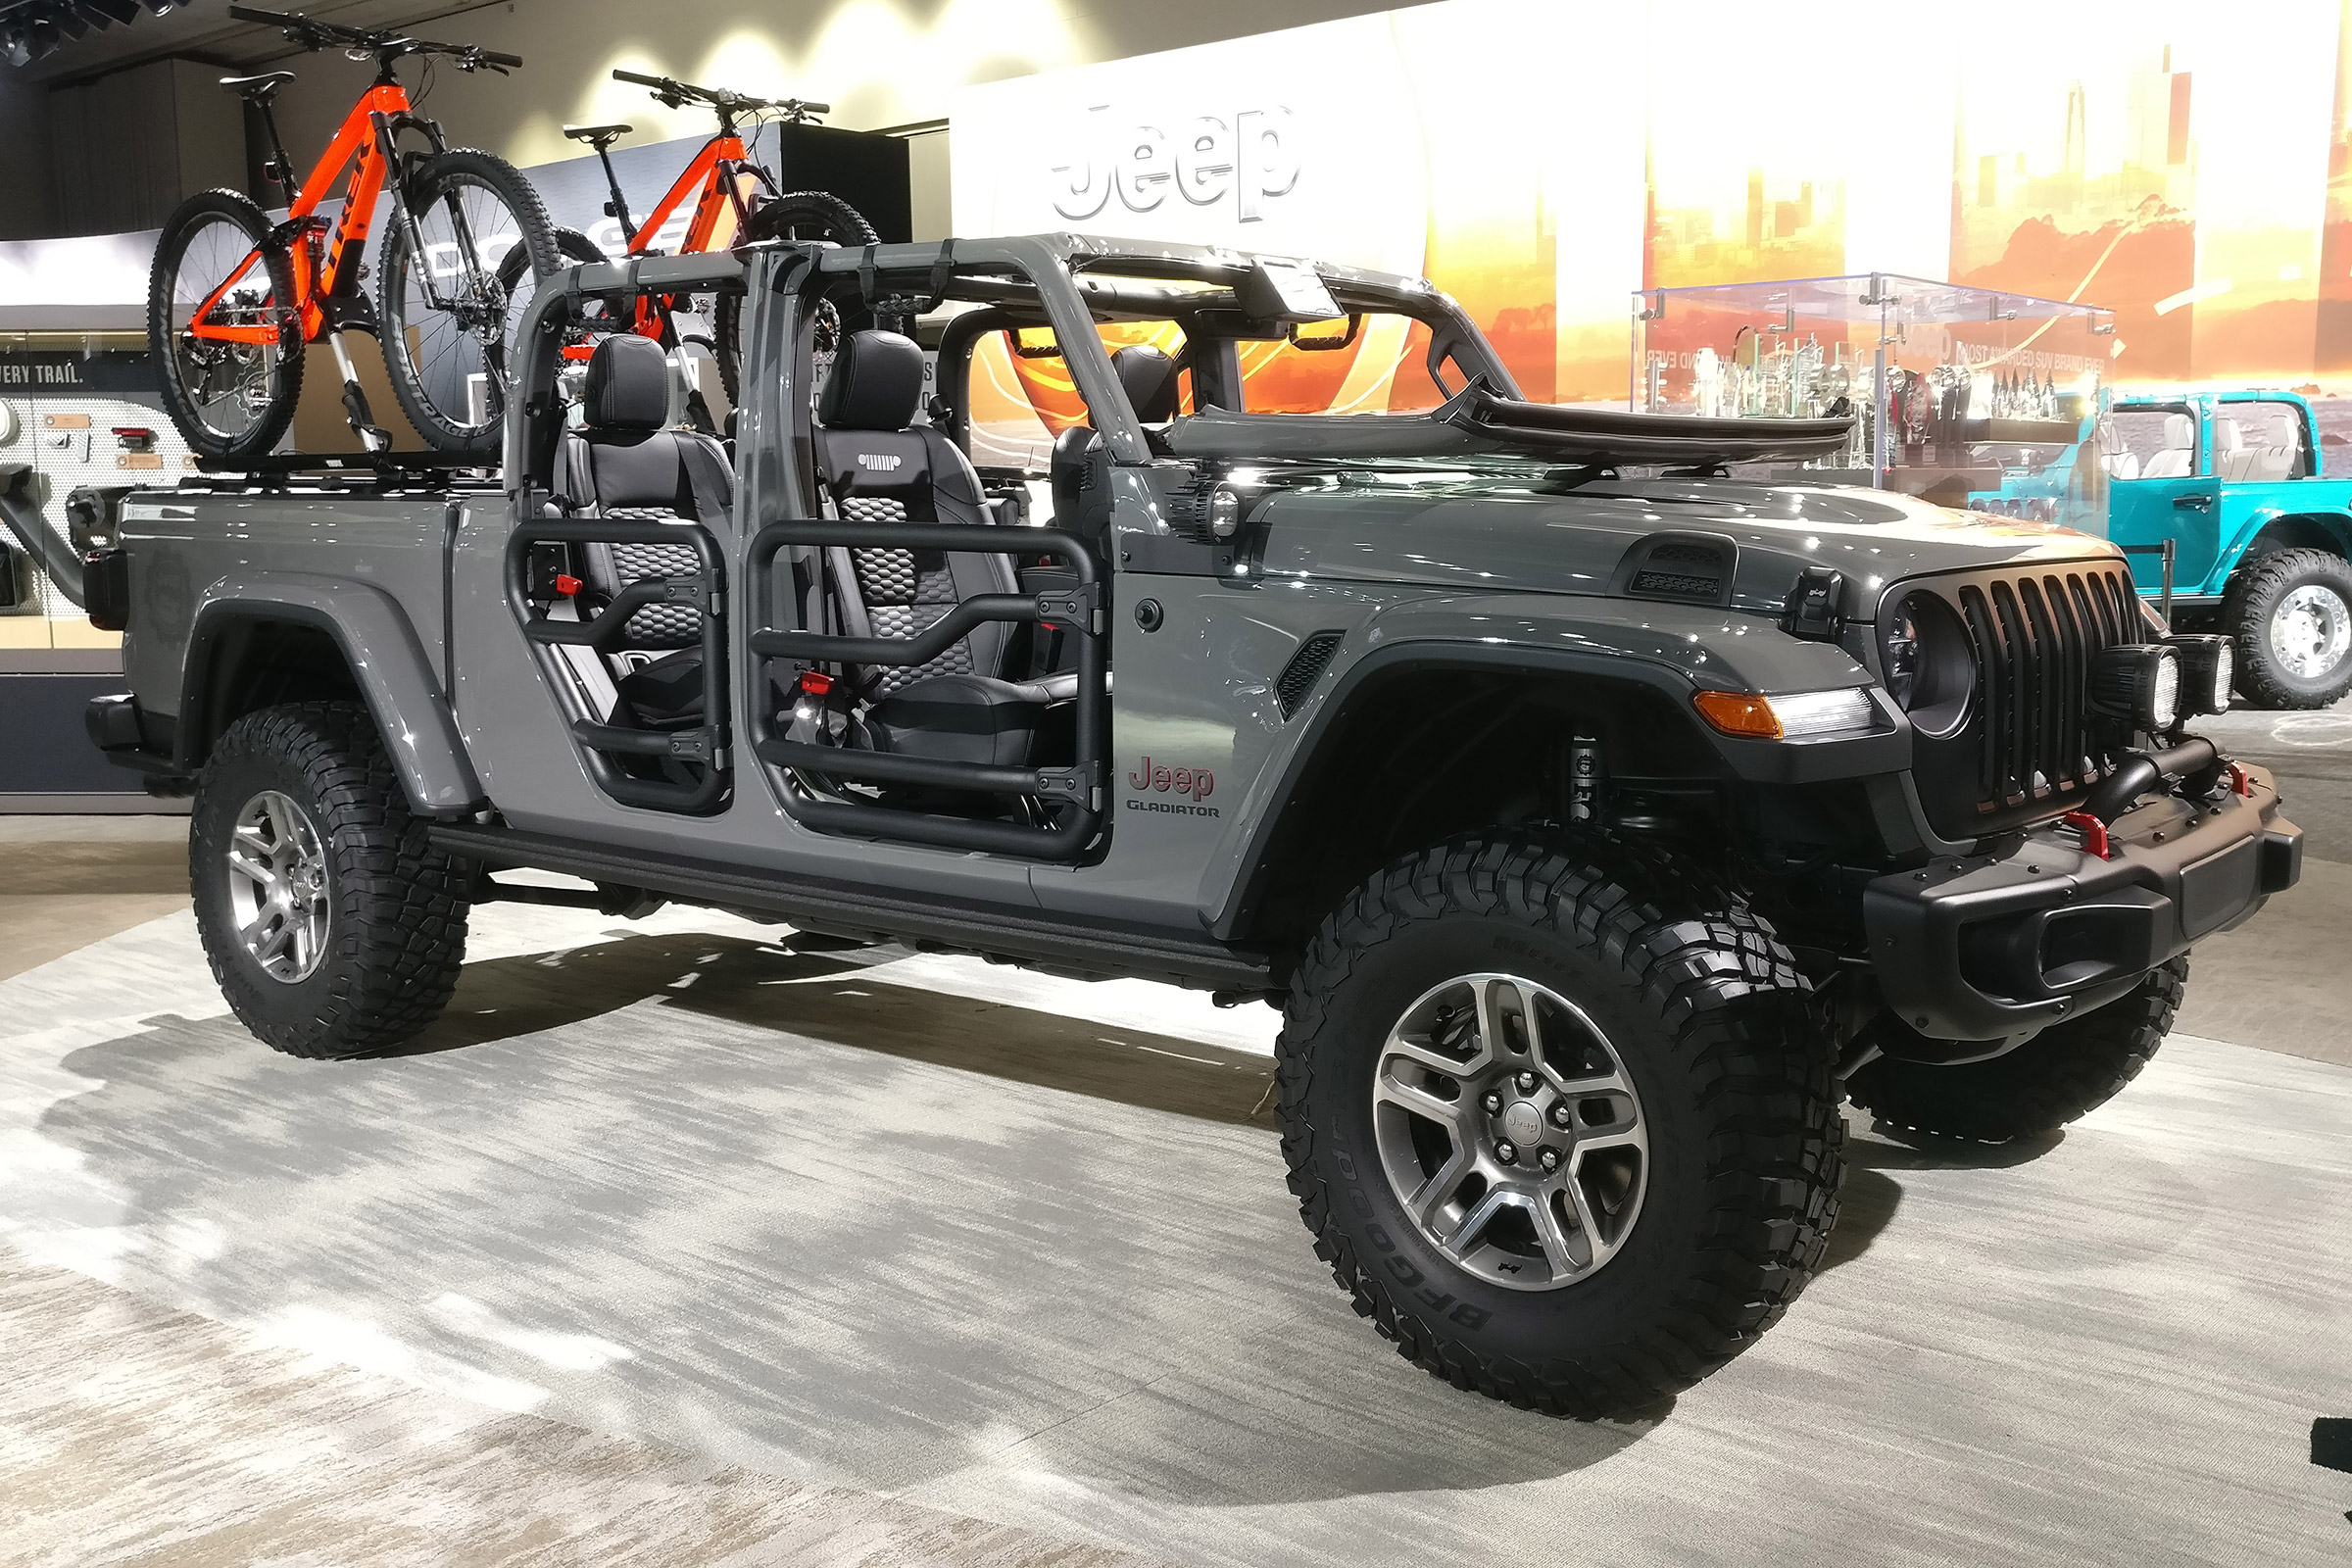 Gladiator's Ready! New Jeep Wrangler Pick Up Truck Due